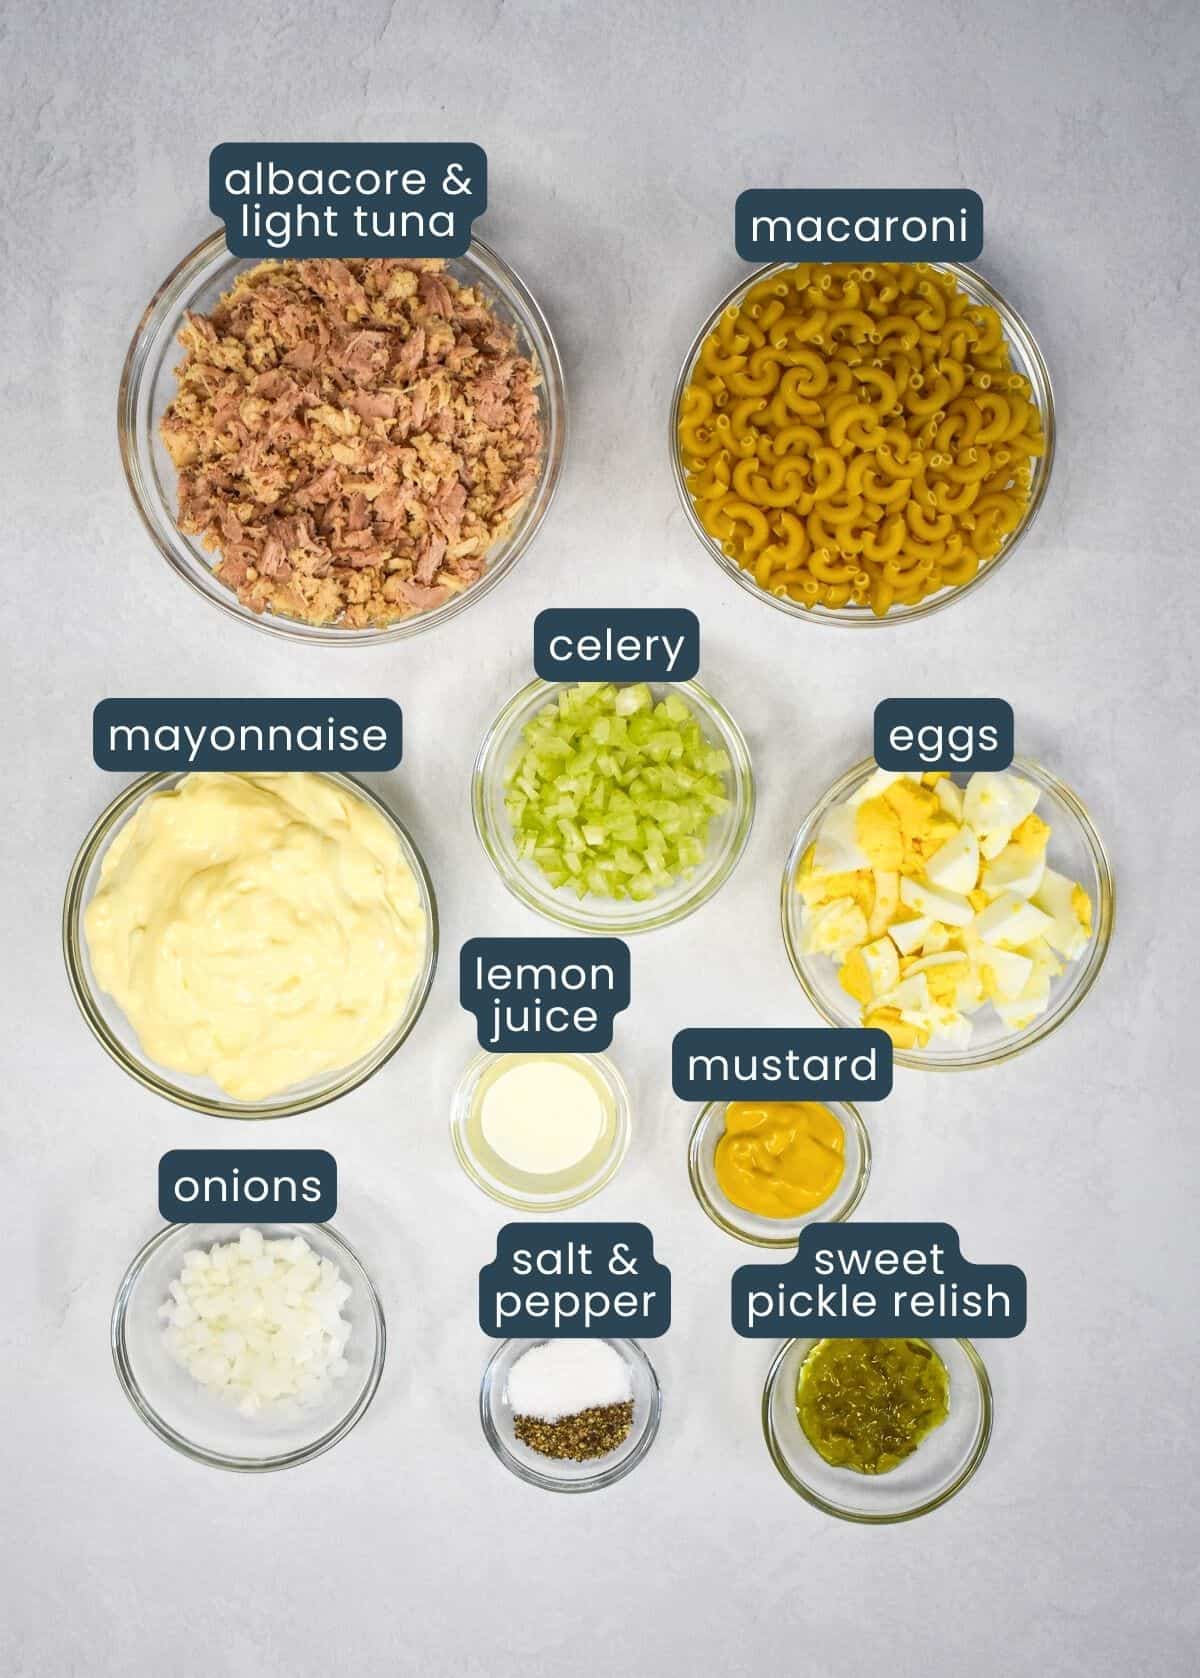 The ingredients for the tuna macaroni salad, prepped and arranged in glass bowls with a blue and white graphic labeling each ingredient.